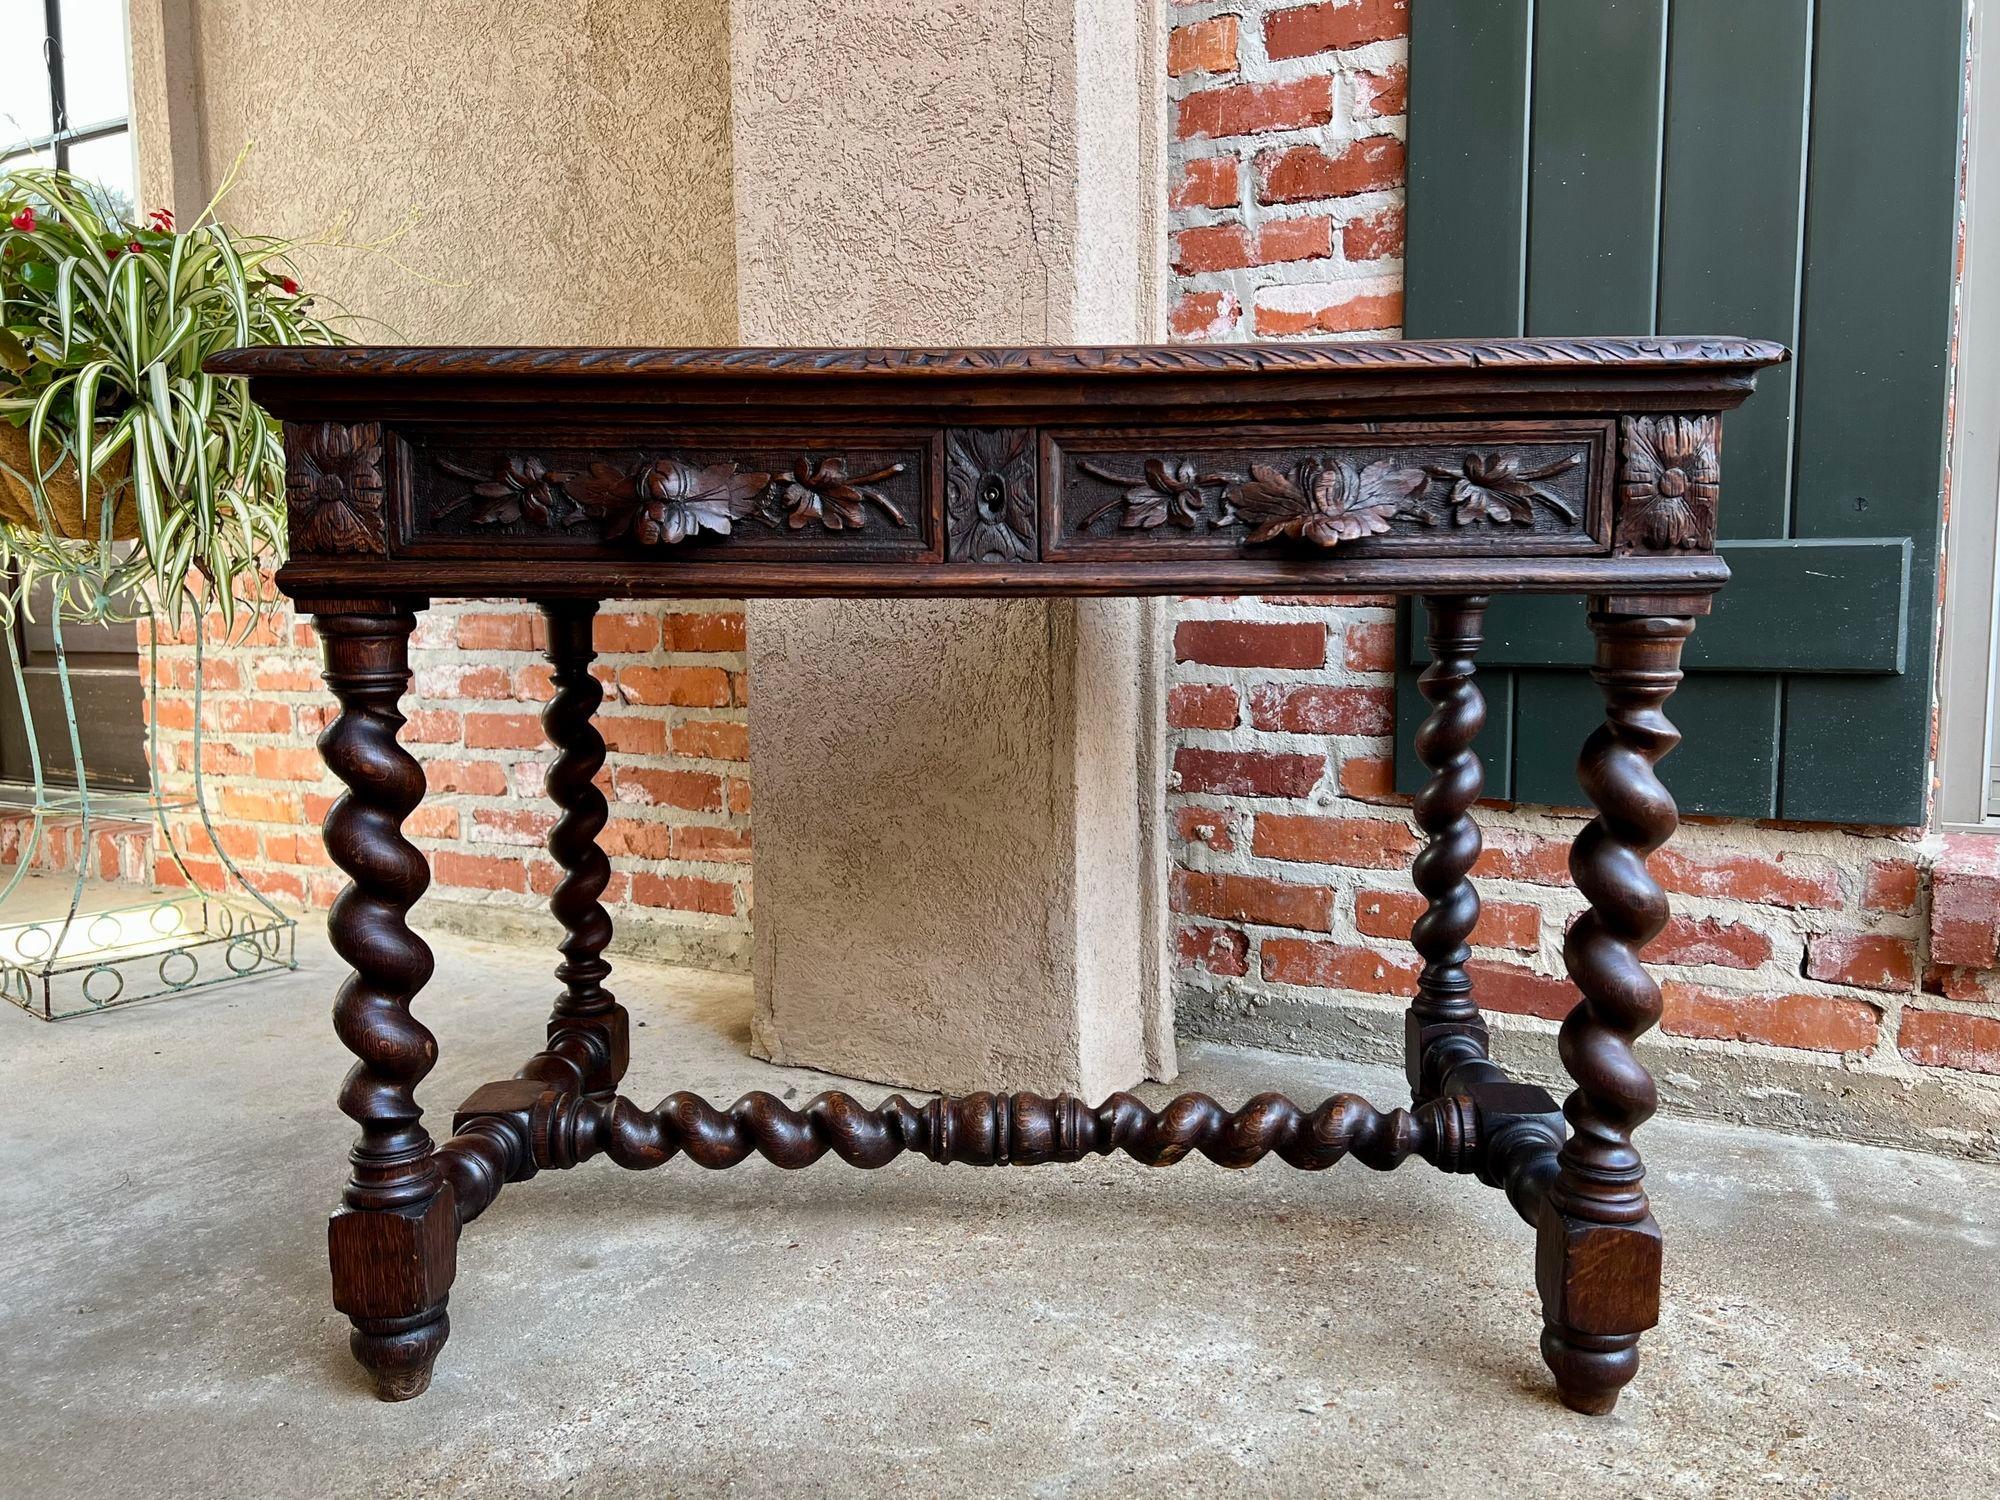 French Provincial 19th century French Oak Sofa Table Writing Desk Carved Black Forest Barley Twist